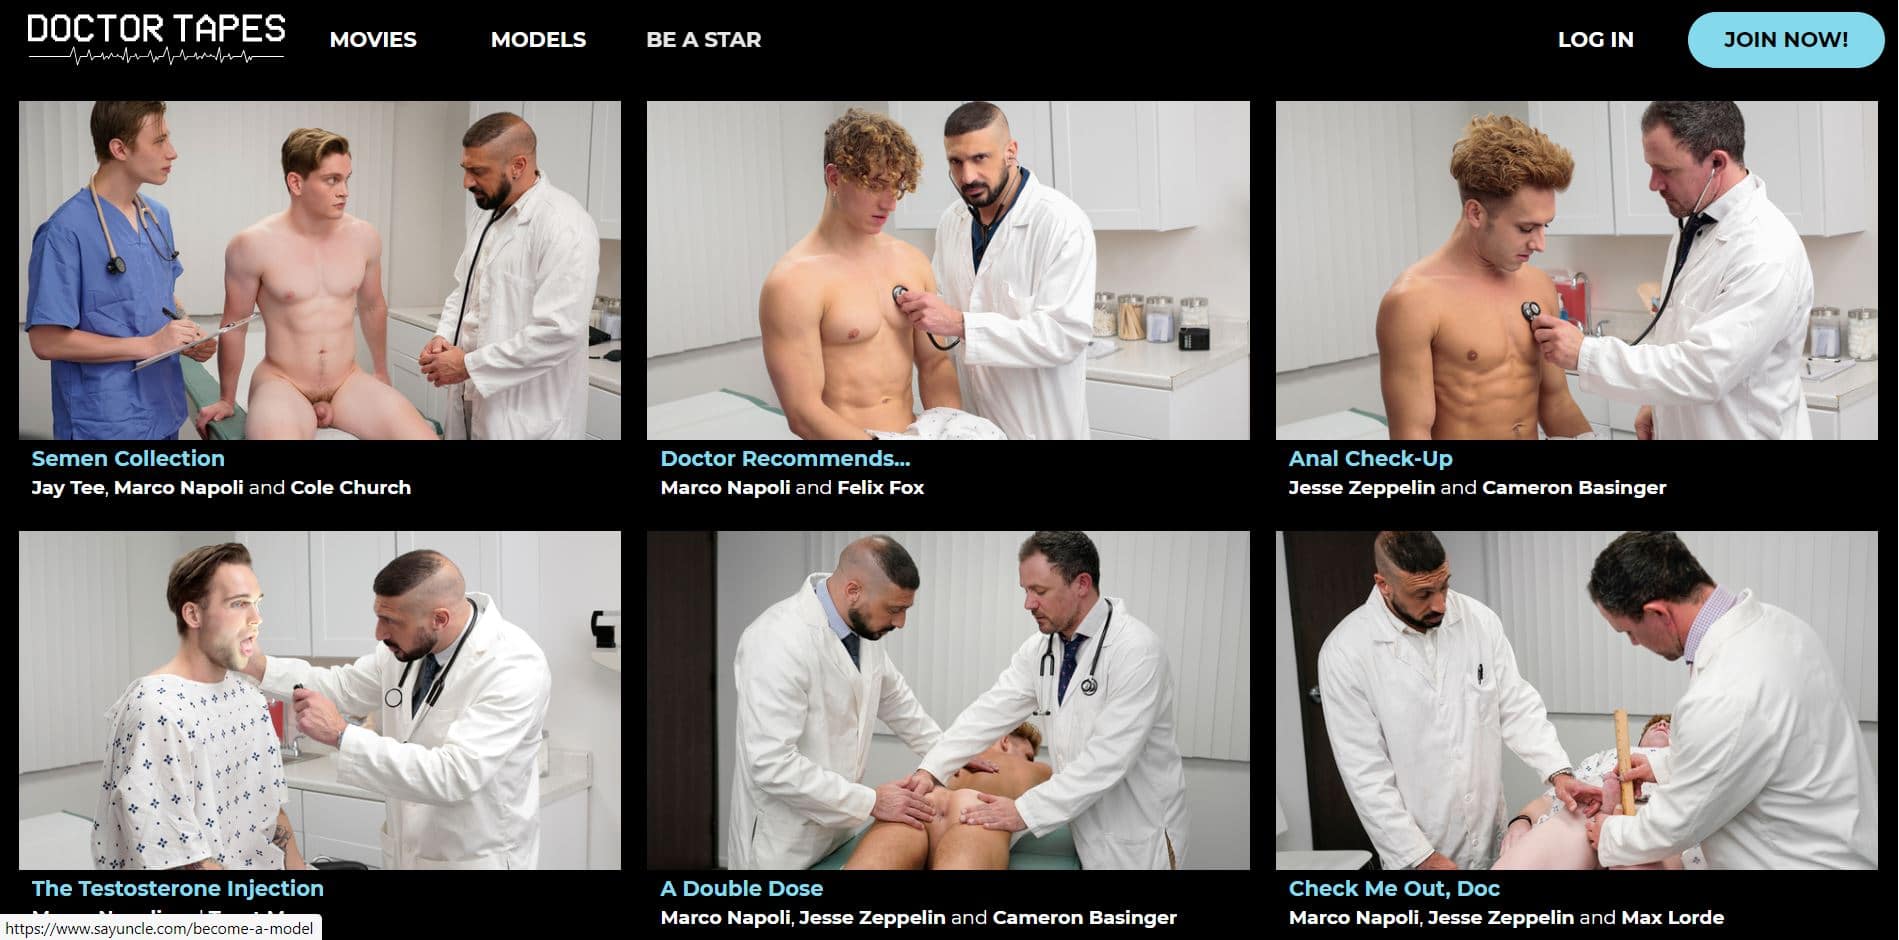 Doctor Tapes Say Uncle Network Honest Gay Porn Site Review - Gay Porn Site Review - Doctor Tapes